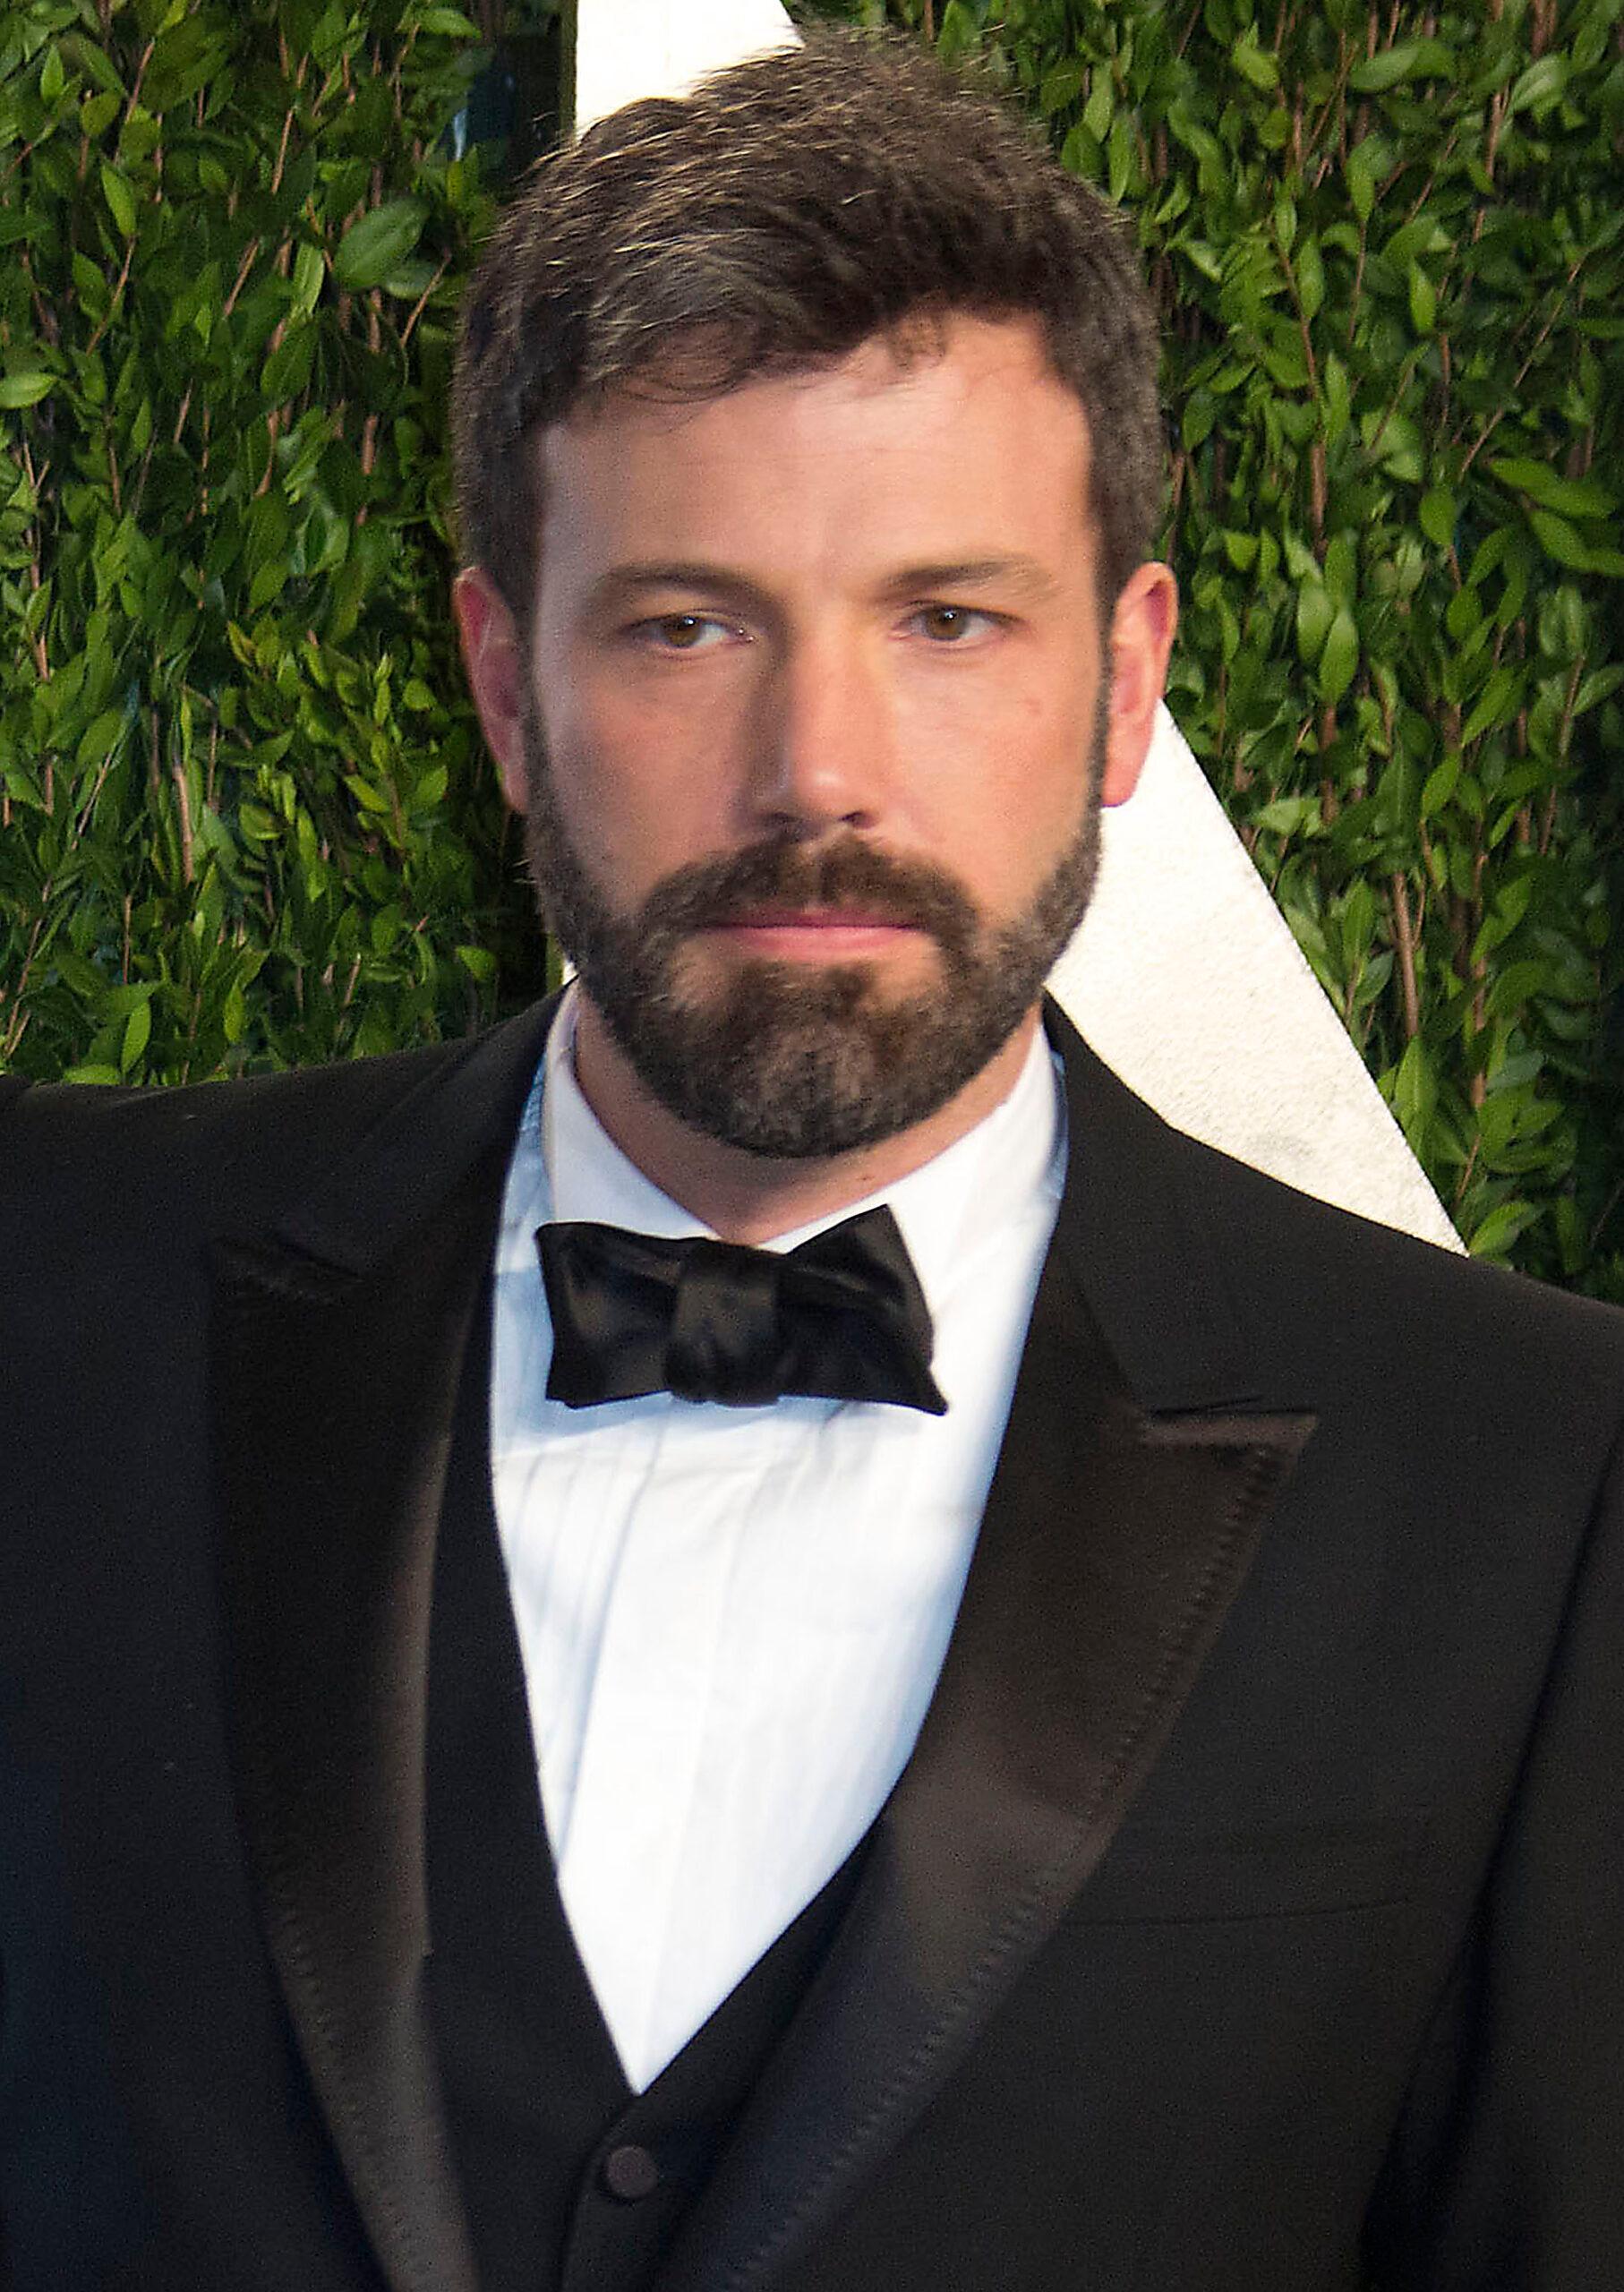 //Ben_Affleck_Calls_Out_Netflix_For_Choosing_Quantity_Over_Quality_ scaled